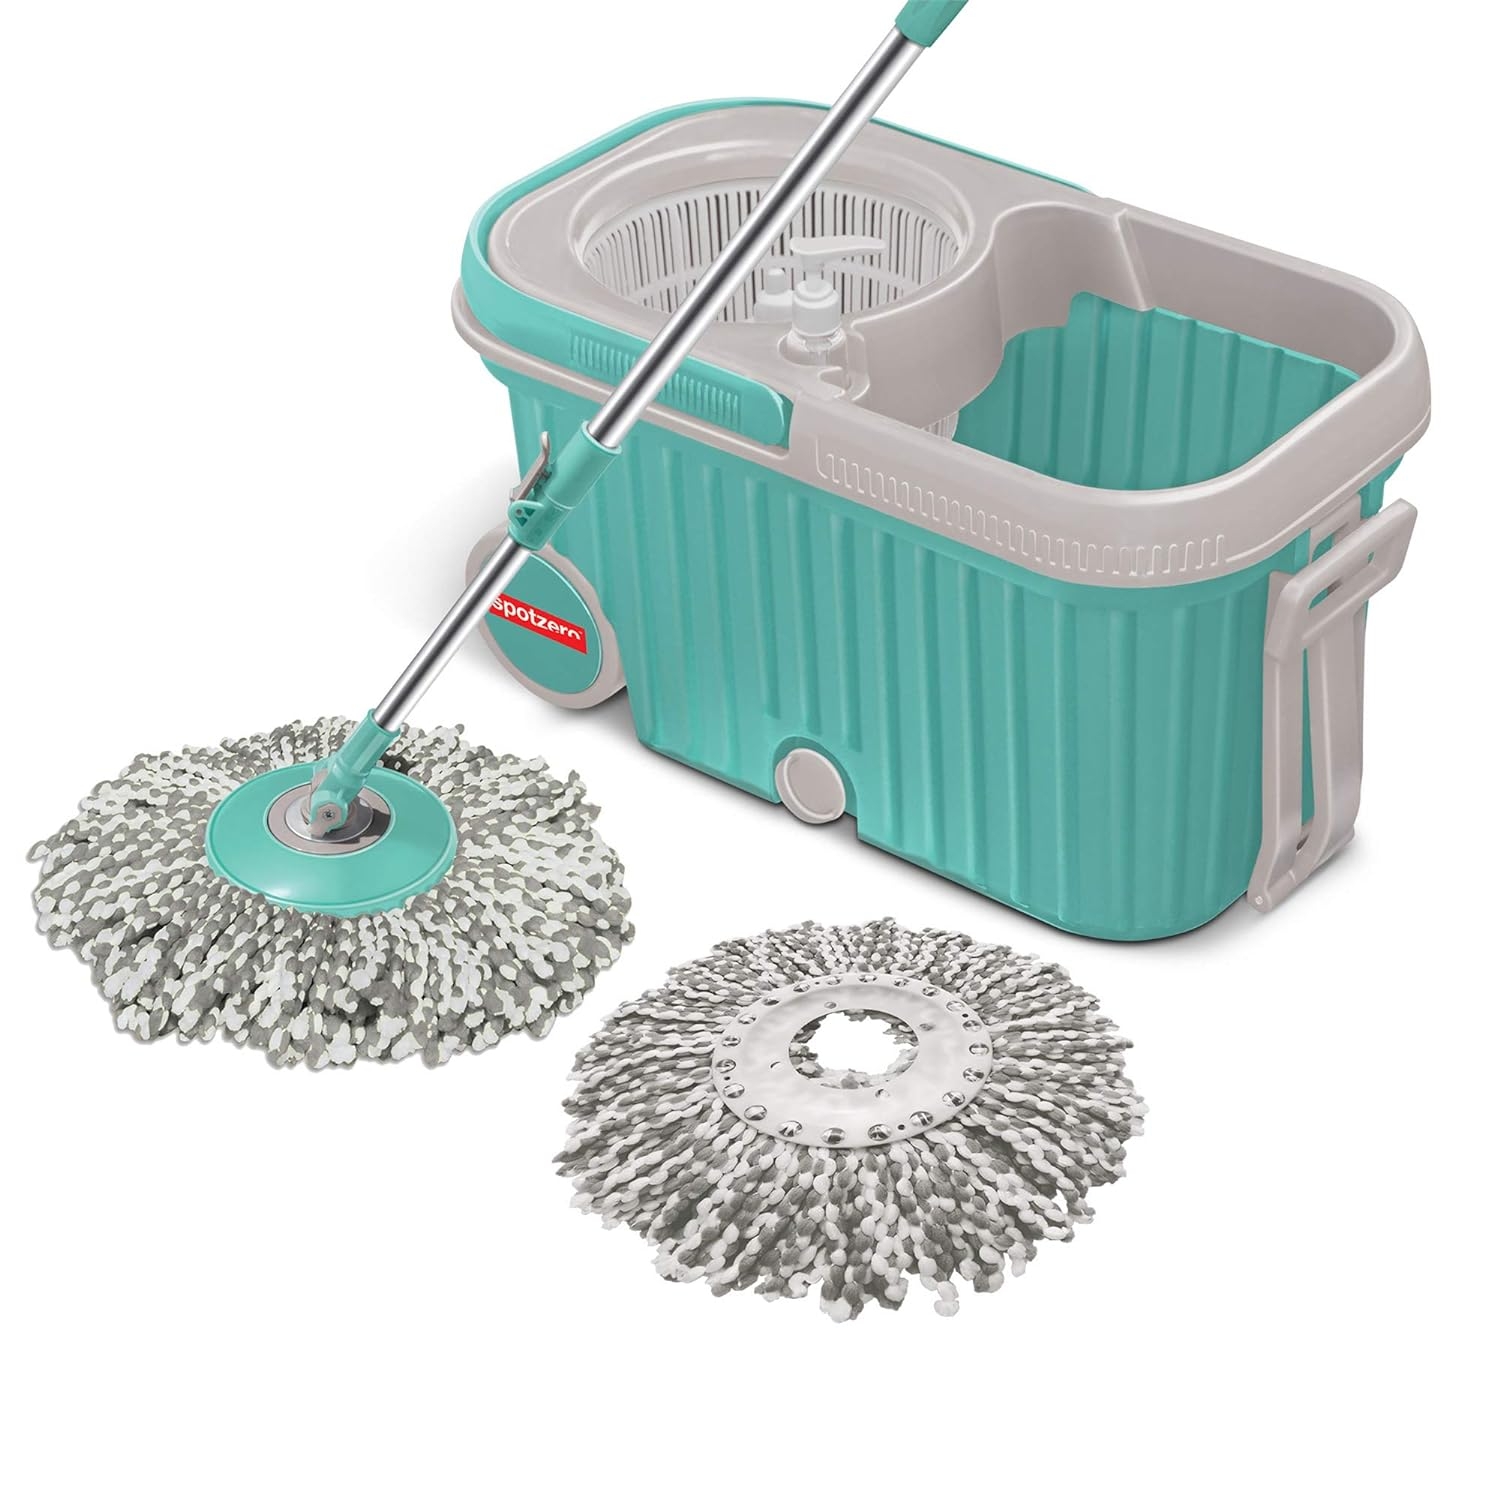 Spotzero by Milton Elite Spin Mop with Bigger Wheels & Plastic Auto Fold Handle for 360° Cleaning (Two Refills)